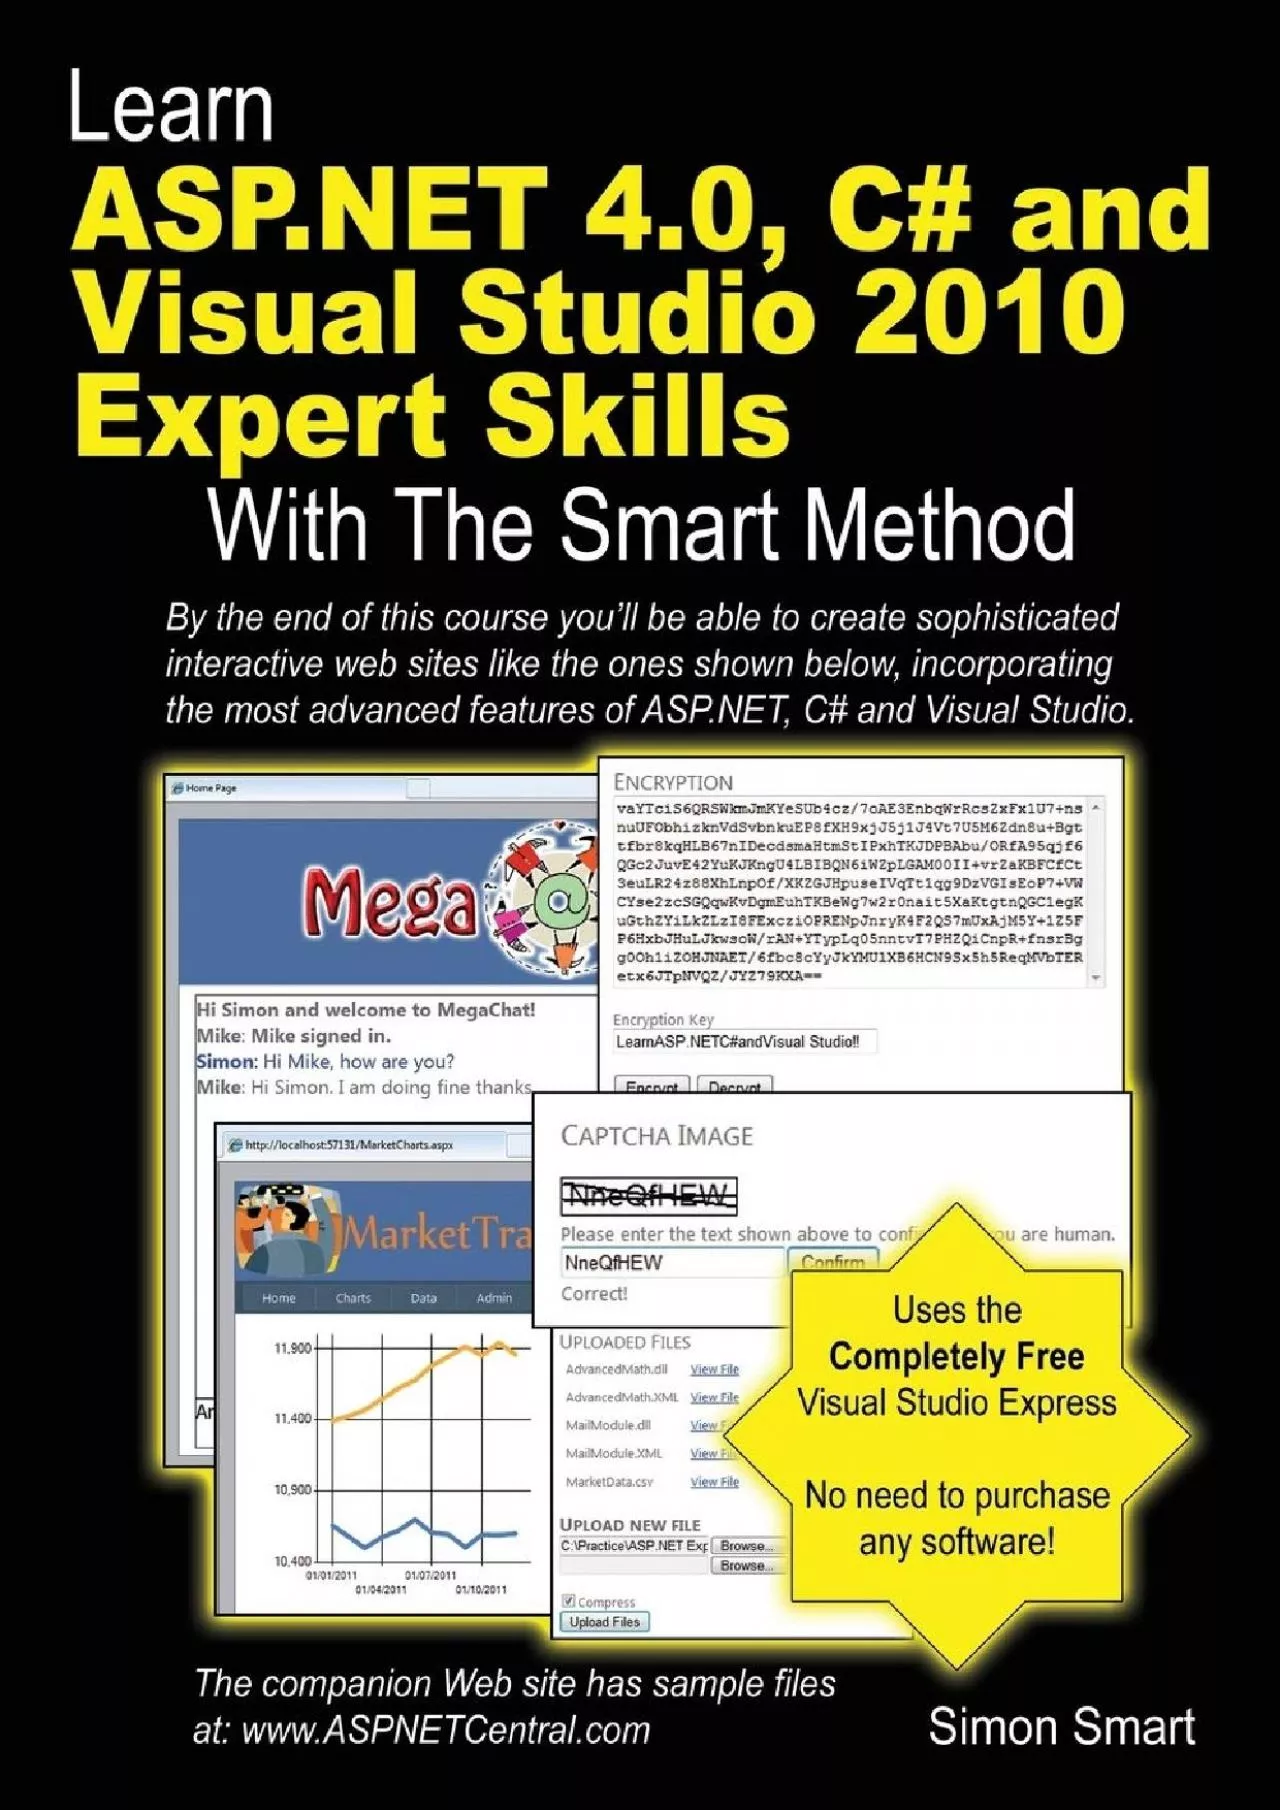 [READ]-Learn ASP.NET 4.0, C and Visual Studio 2010 Expert Skills with The Smart Method: